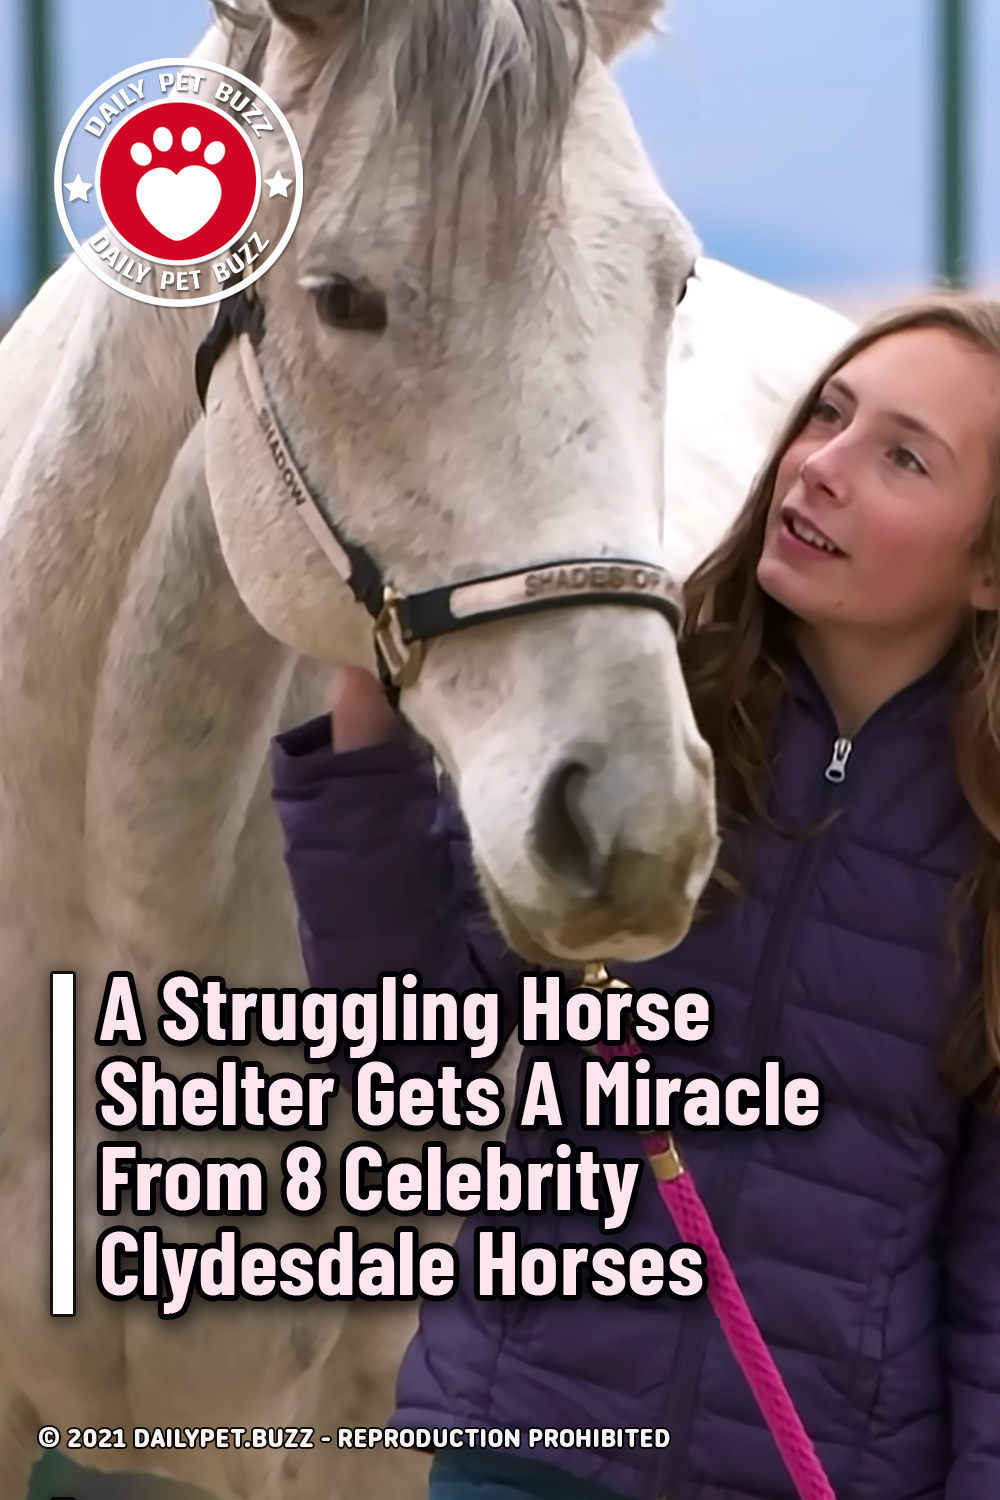 A Struggling Horse Shelter Gets A Miracle From 8 Celebrity Clydesdale Horses